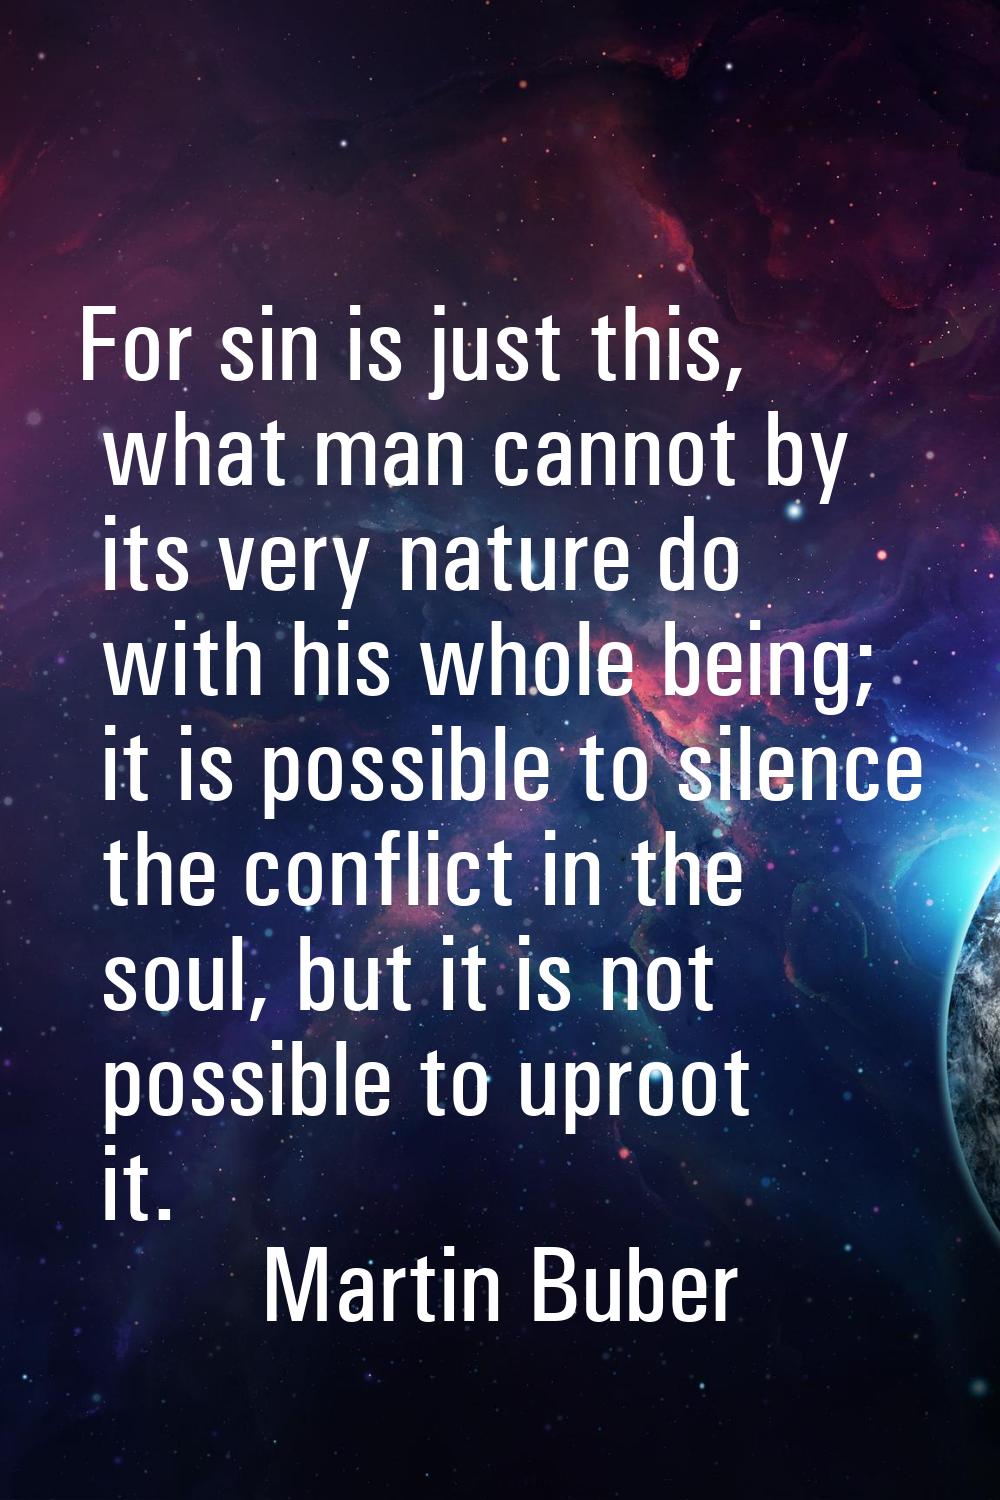 For sin is just this, what man cannot by its very nature do with his whole being; it is possible to